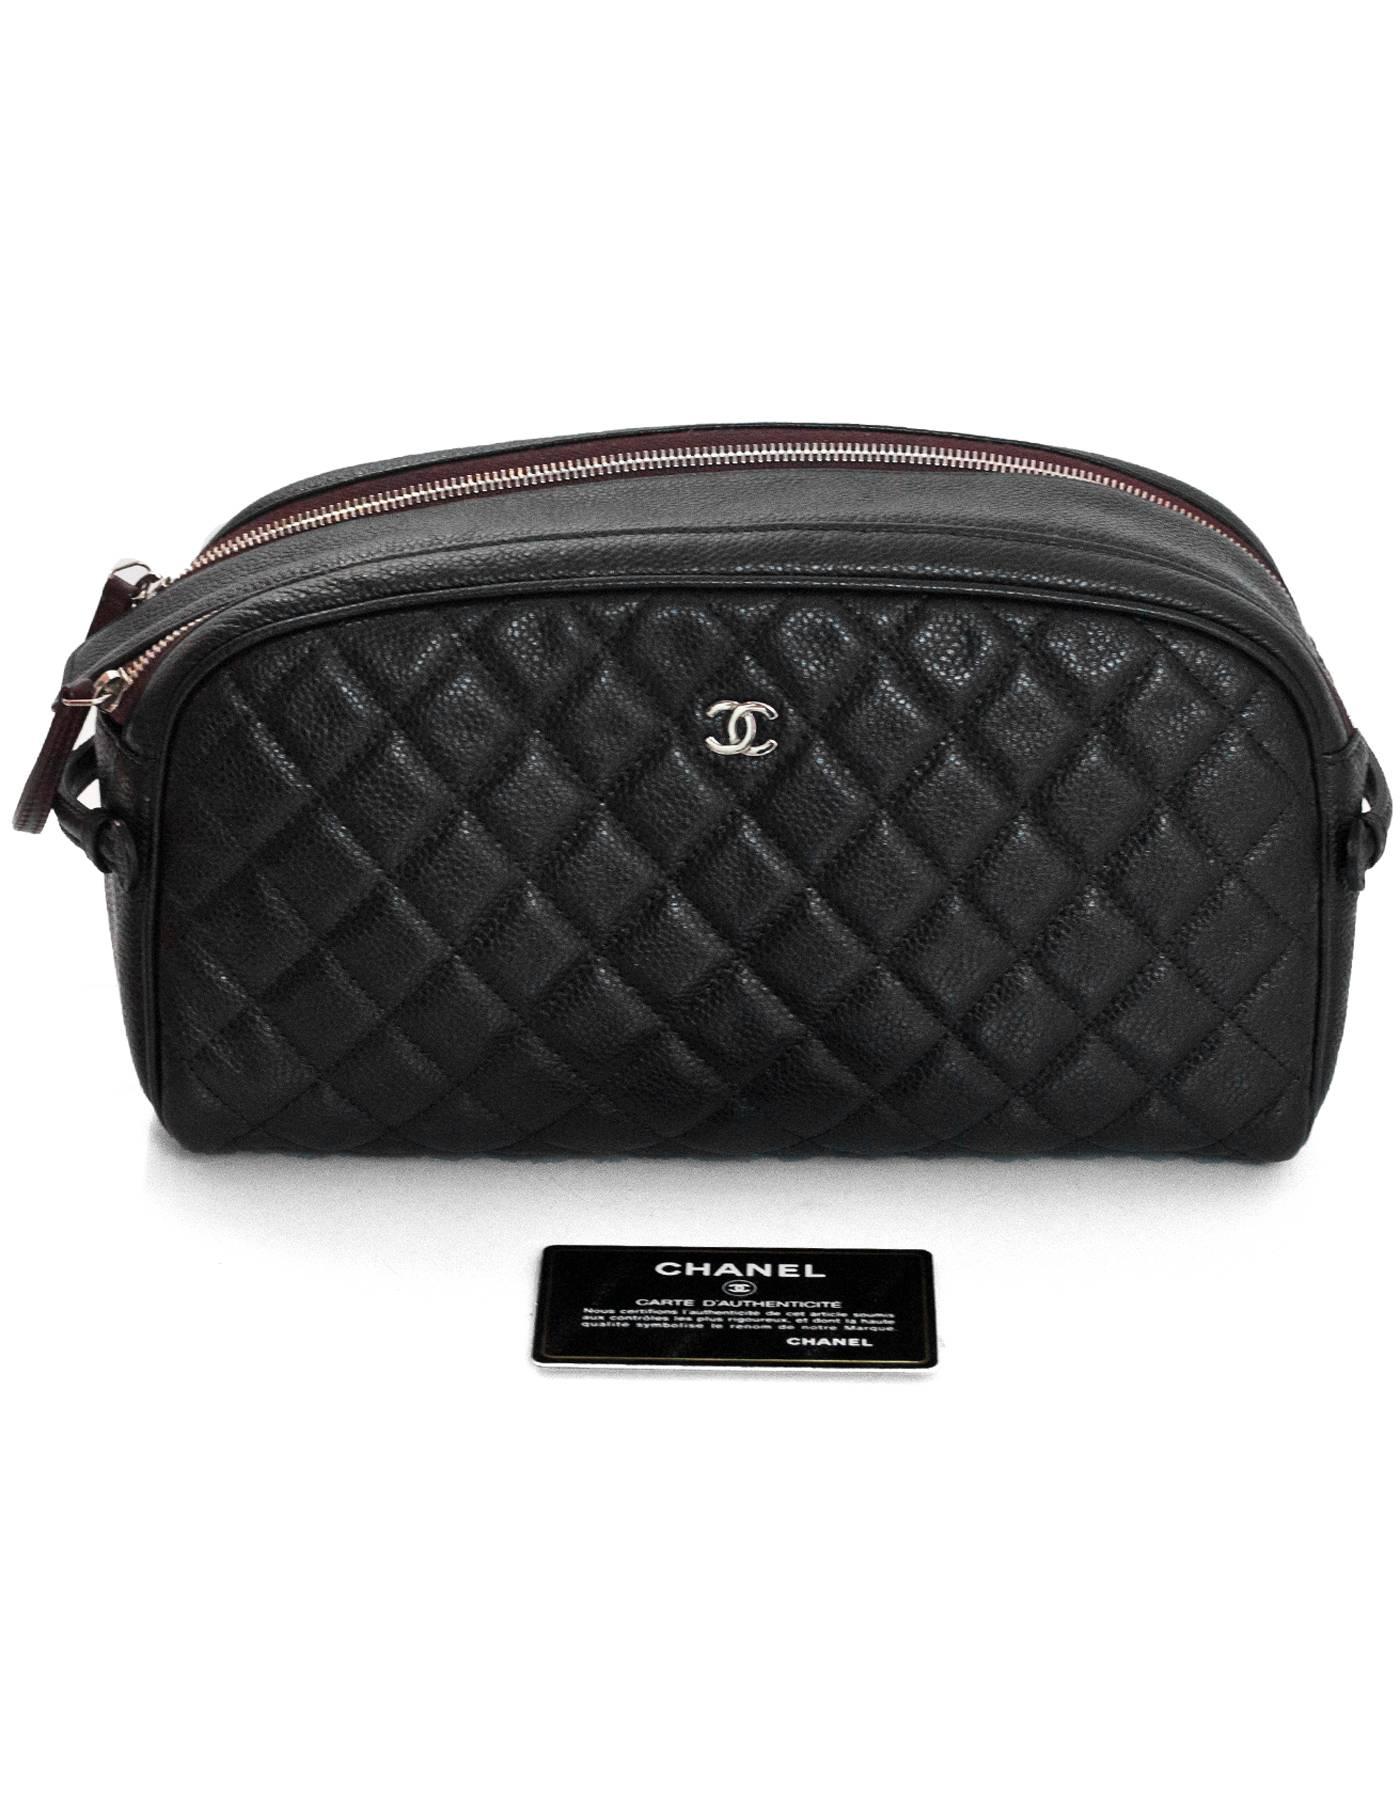 Chanel Black Caviar Leather Double Zip Cosmetic / Toiletry Case Bag 2